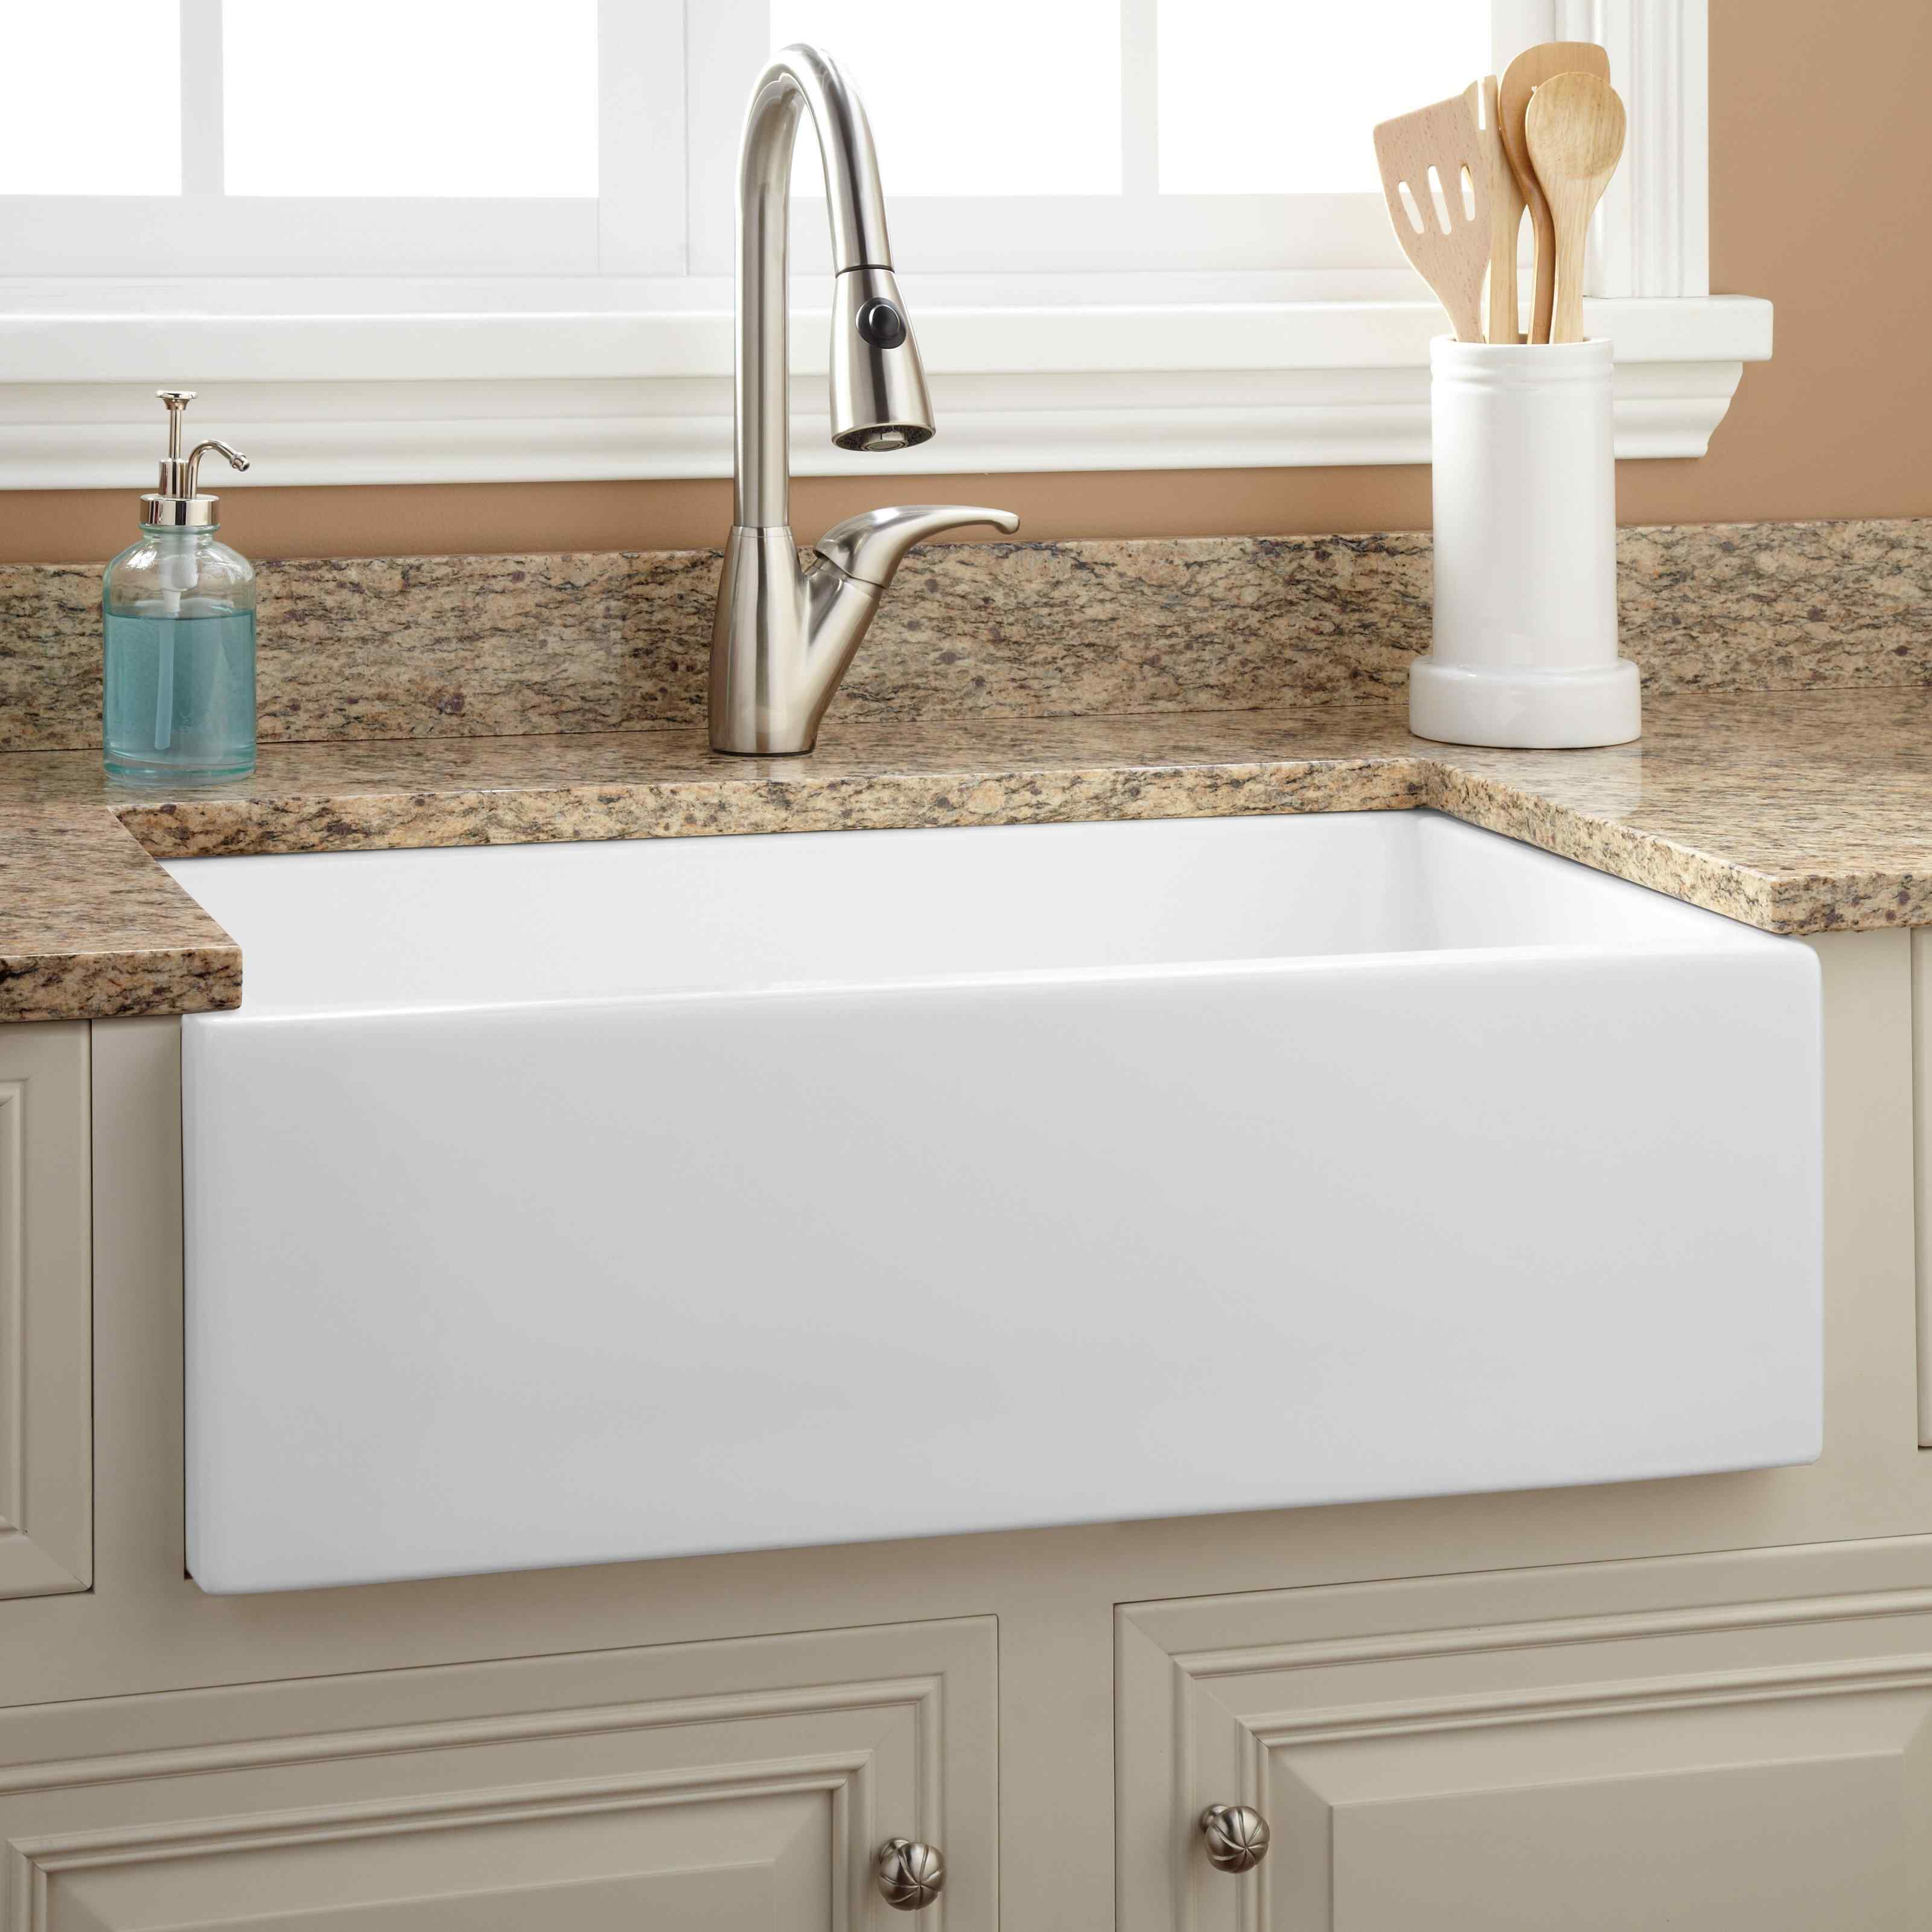 What Is A Fireclay Sink